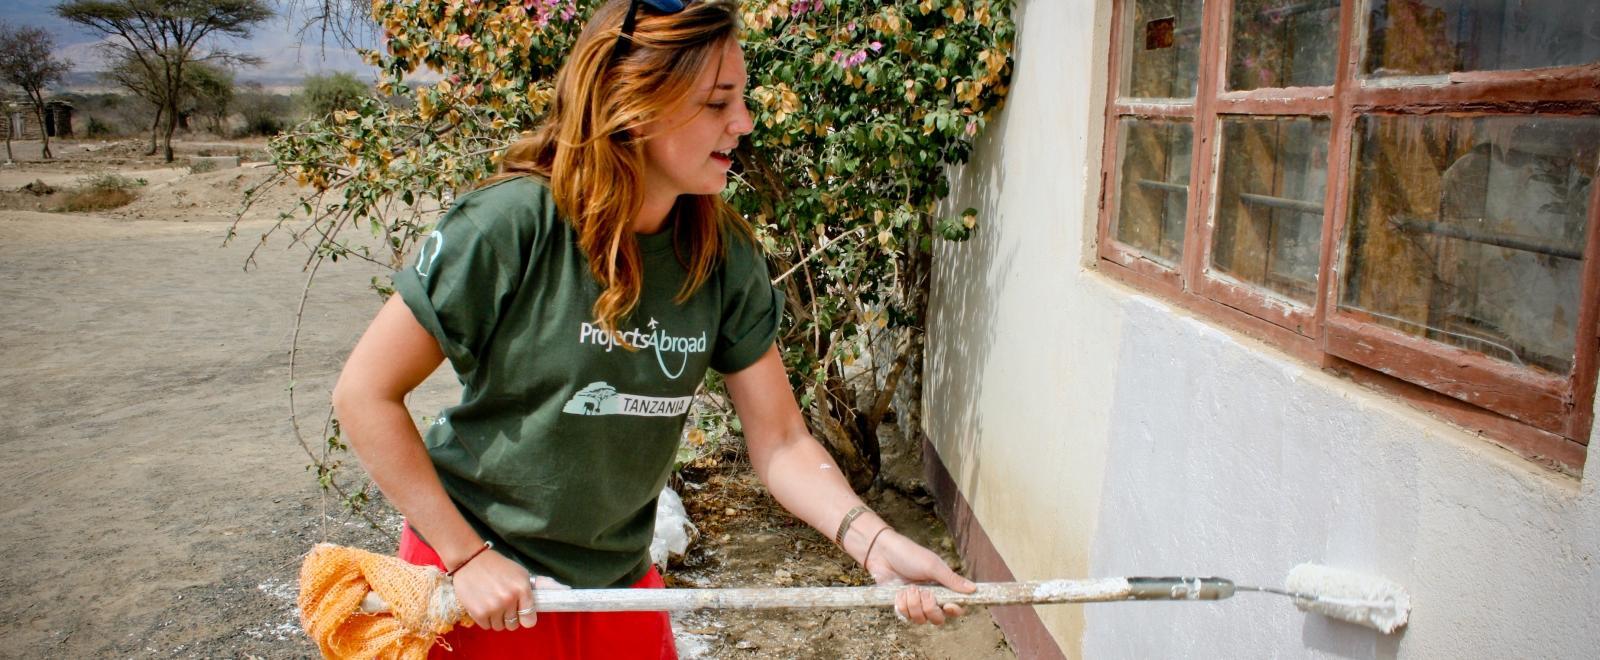 A student doing building volunteer work in Africa helps paint a newly-constructed school in Tanzania. 